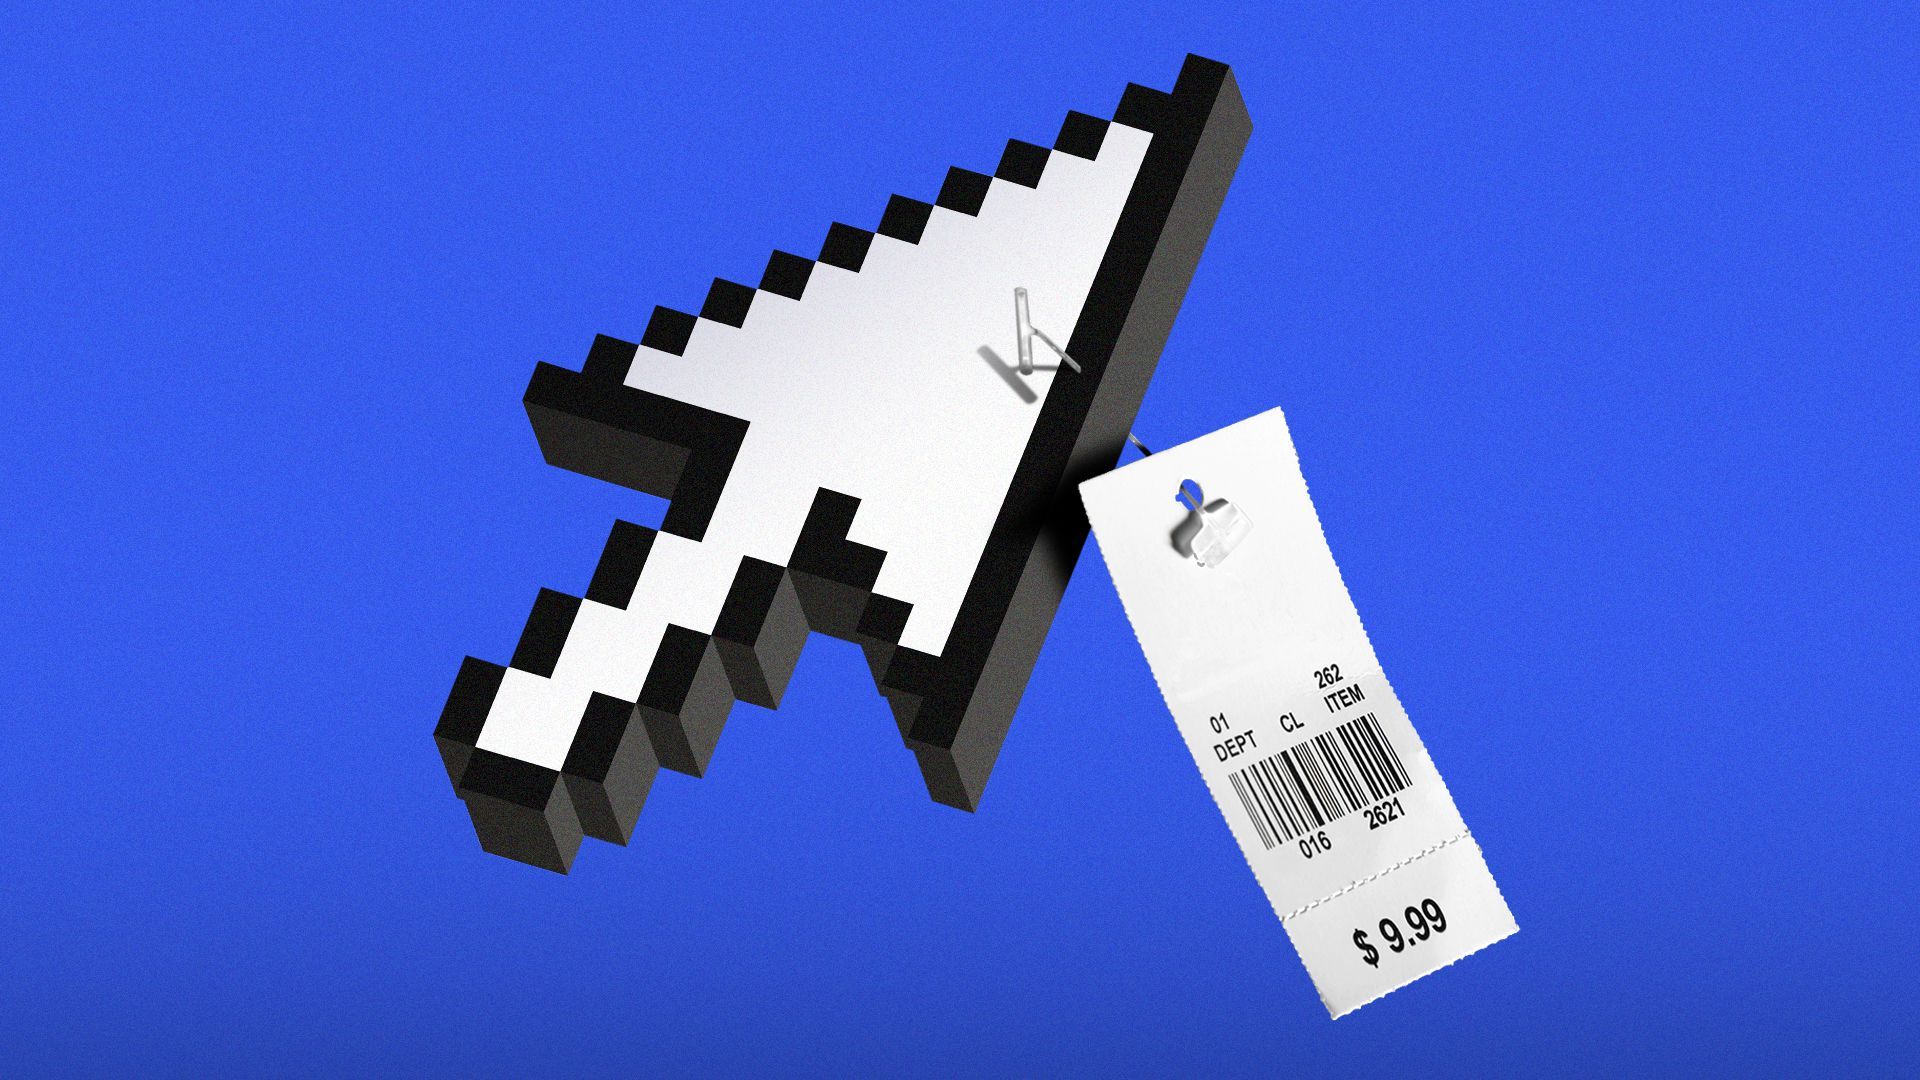 Illustration of a cursor arrow with a retail price tag